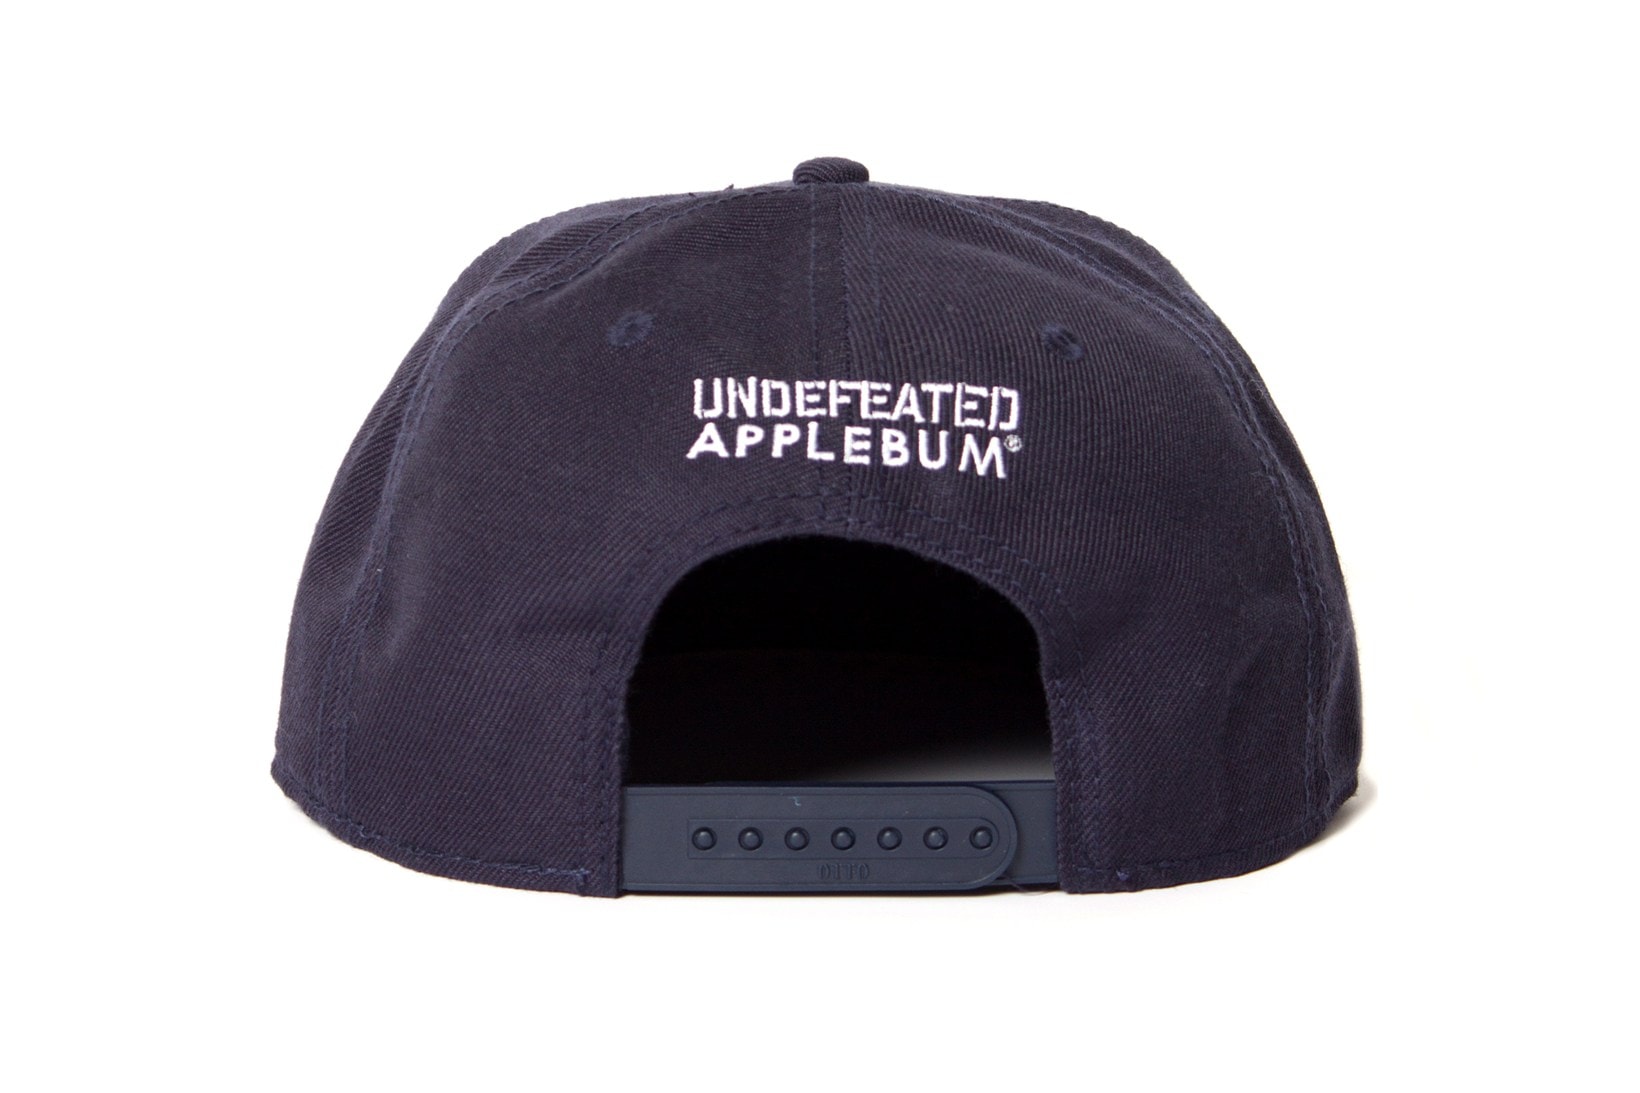 UNDEFEATED x APPLEBUM 2016 Collaboration